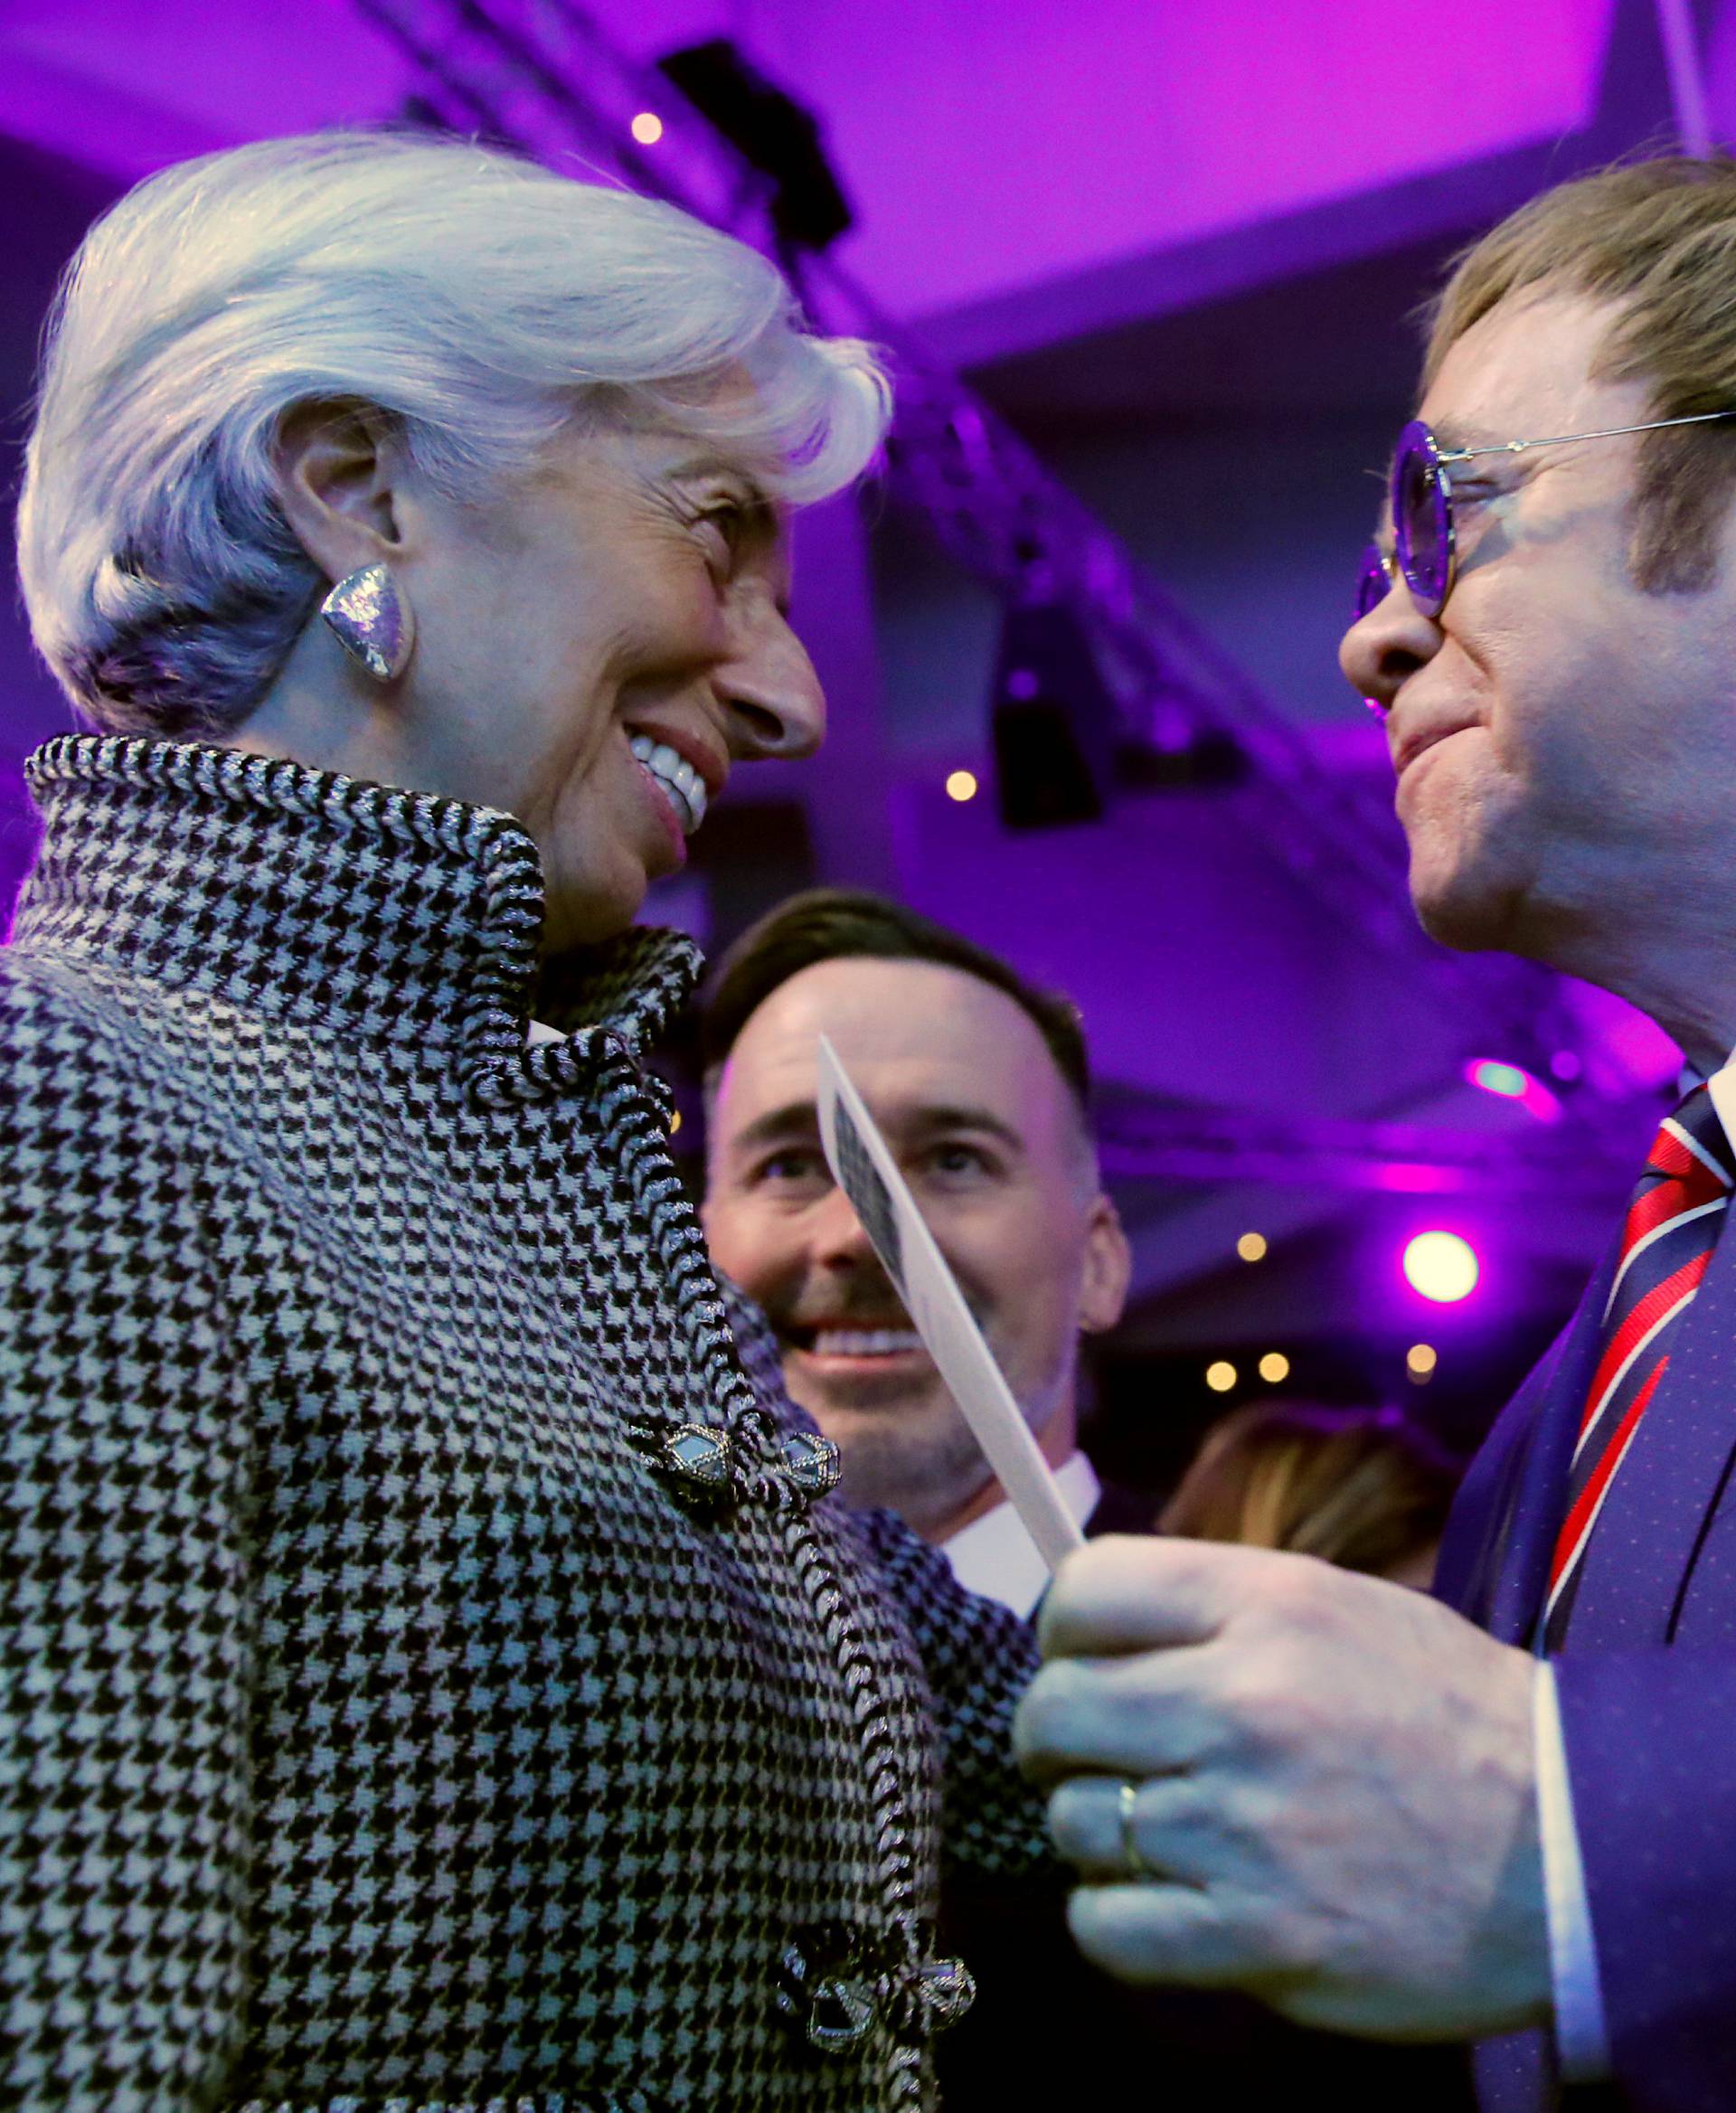 Singer Elton John talks with Christine Lagarde, Managing Director of the International Monetary Fund (IMF), at the Crystal Awards ceremony of the annual meeting of the World Economic Forum (WEF) in Davos